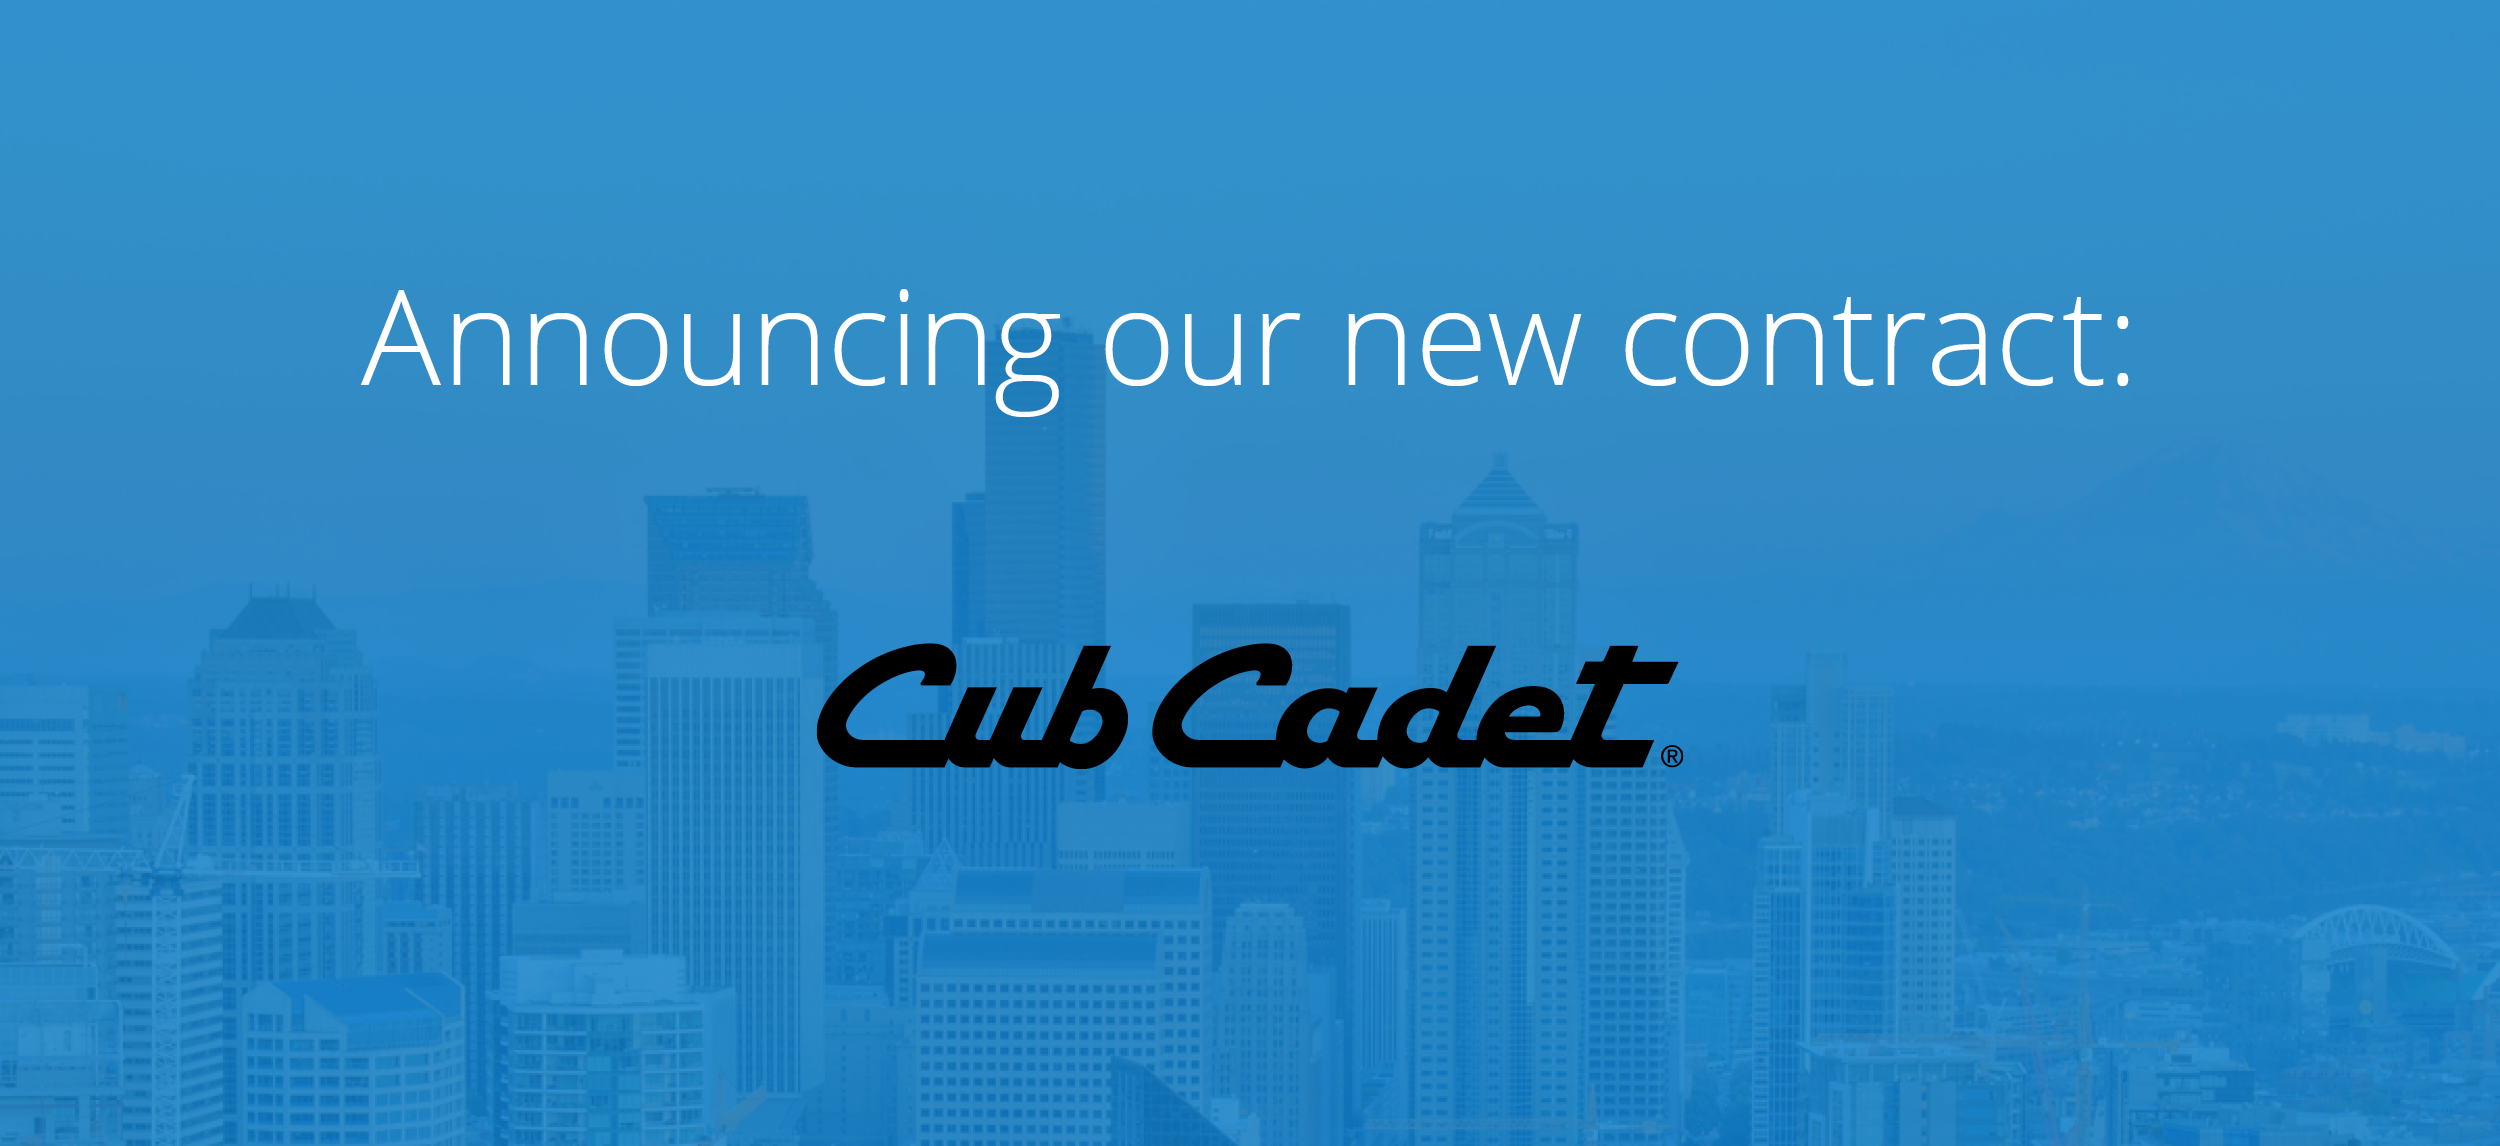 Announcing Cub Cadet: Our Newest Contract